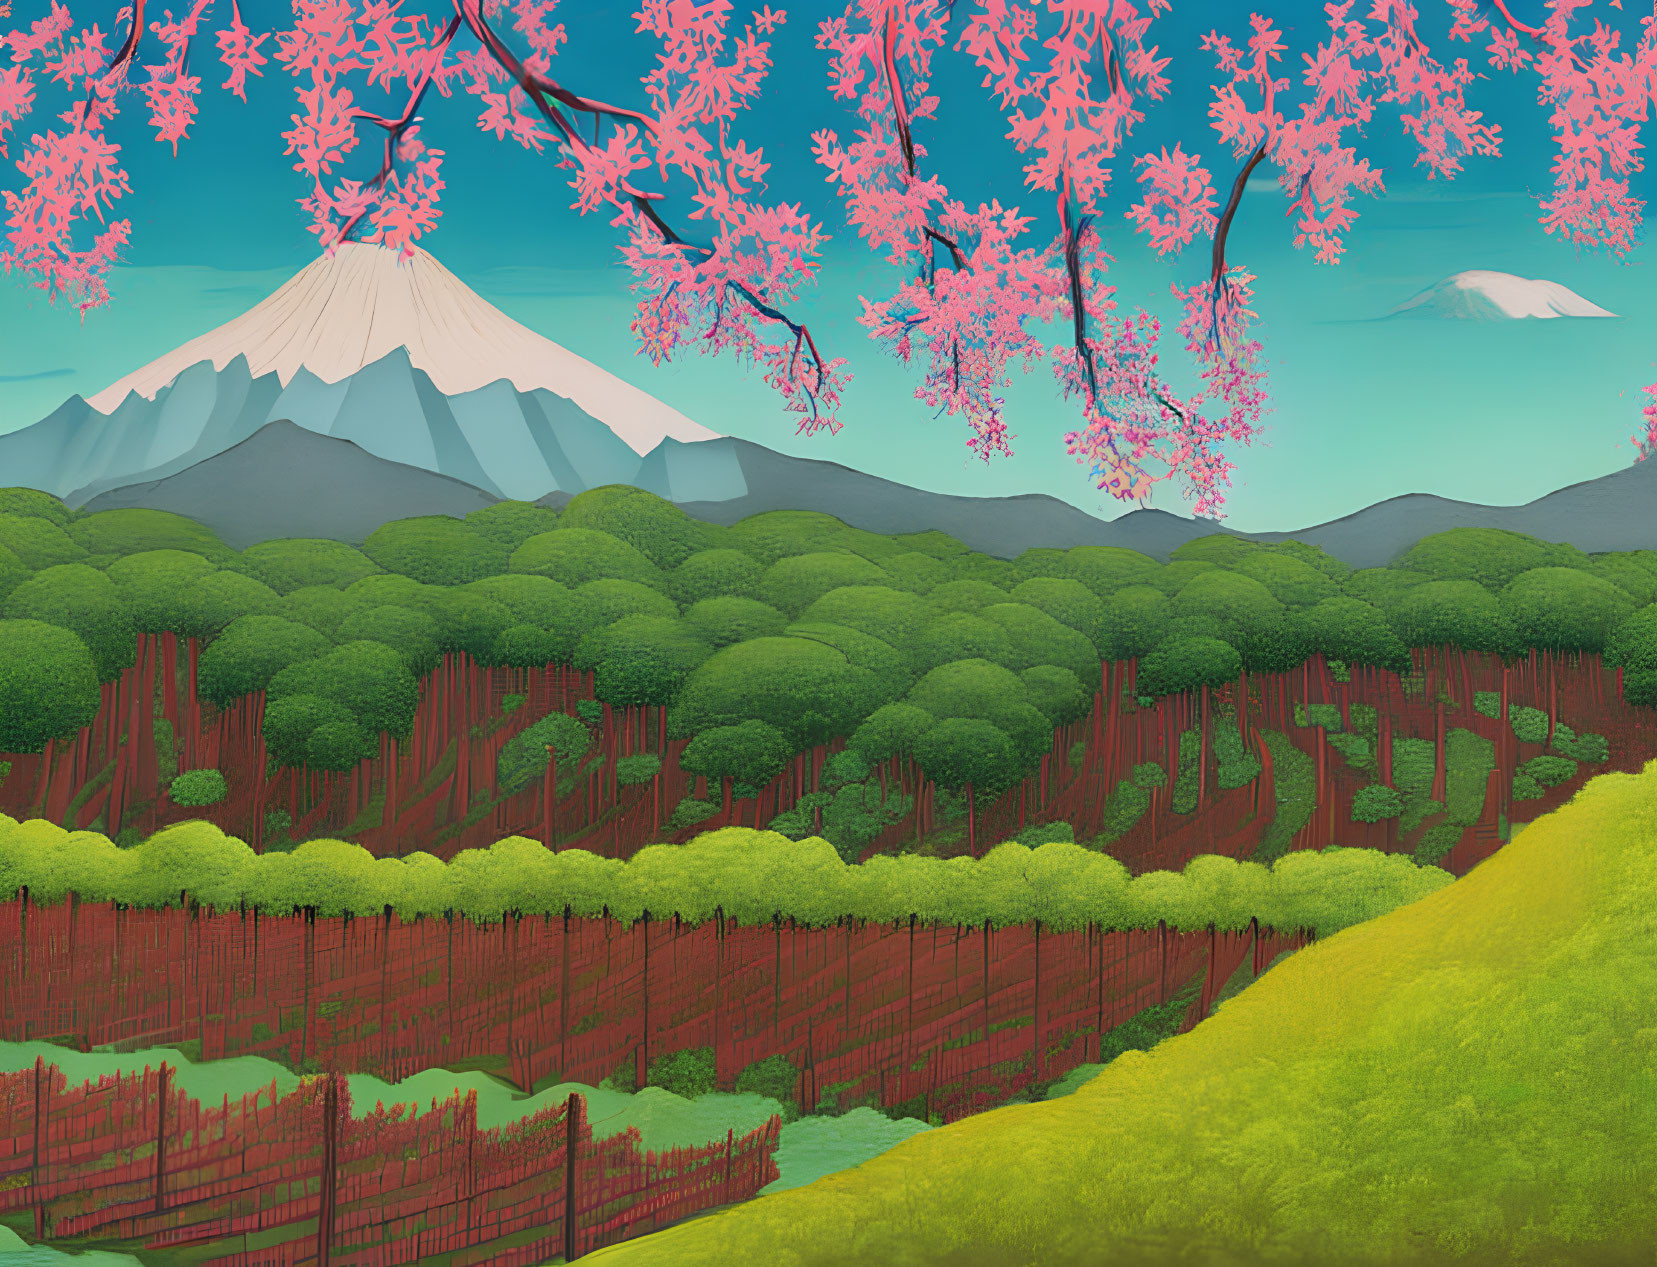 Colorful Cherry Blossom Landscape with Snowy Mountains